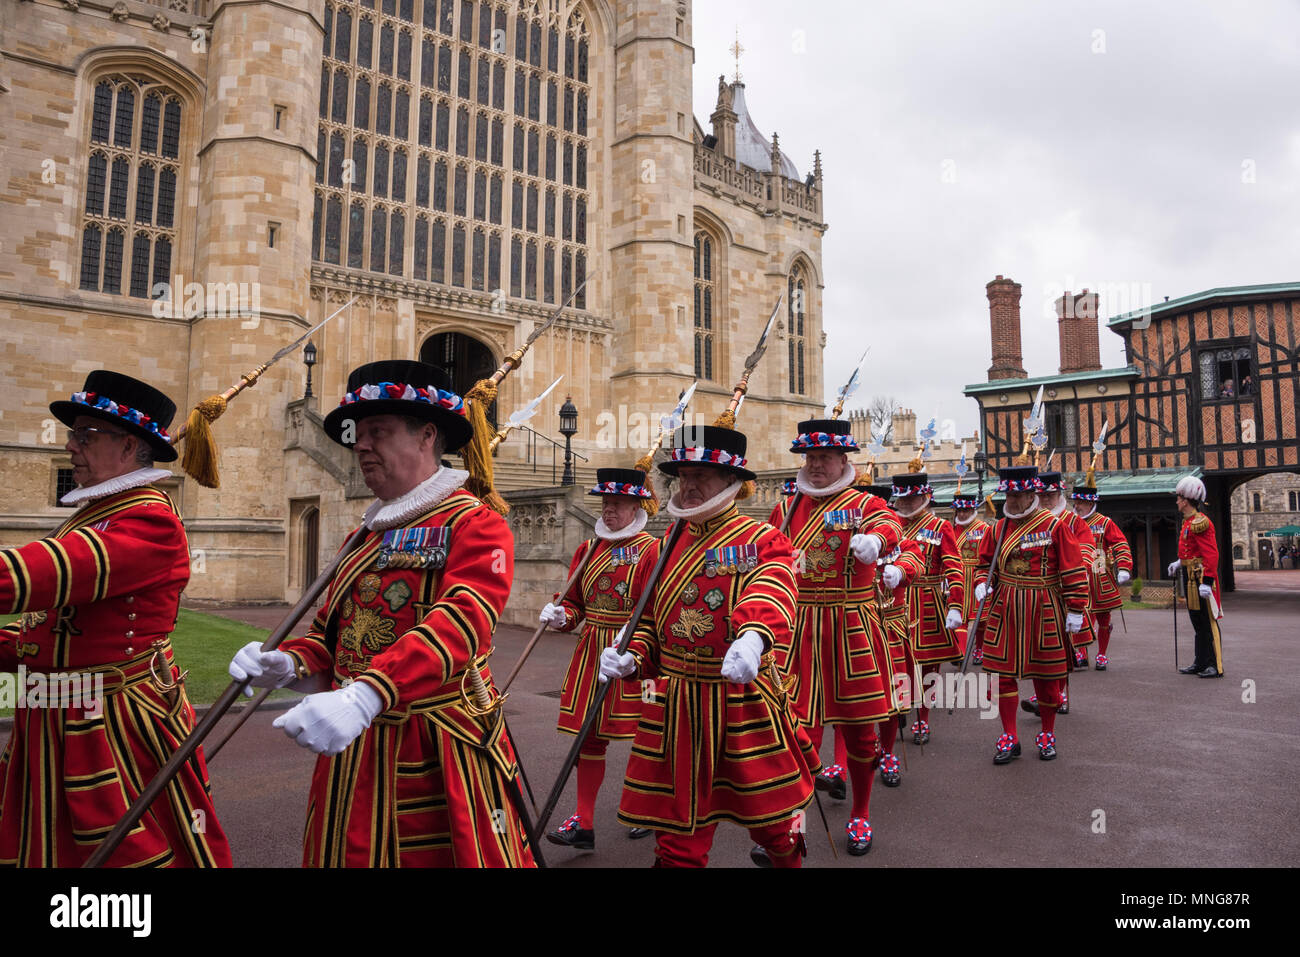 The Yeomen of the Guard march away after a photocall with the Queen at St George's Chapel, Windsor after the distribution of the Maundy Money. Stock Photo